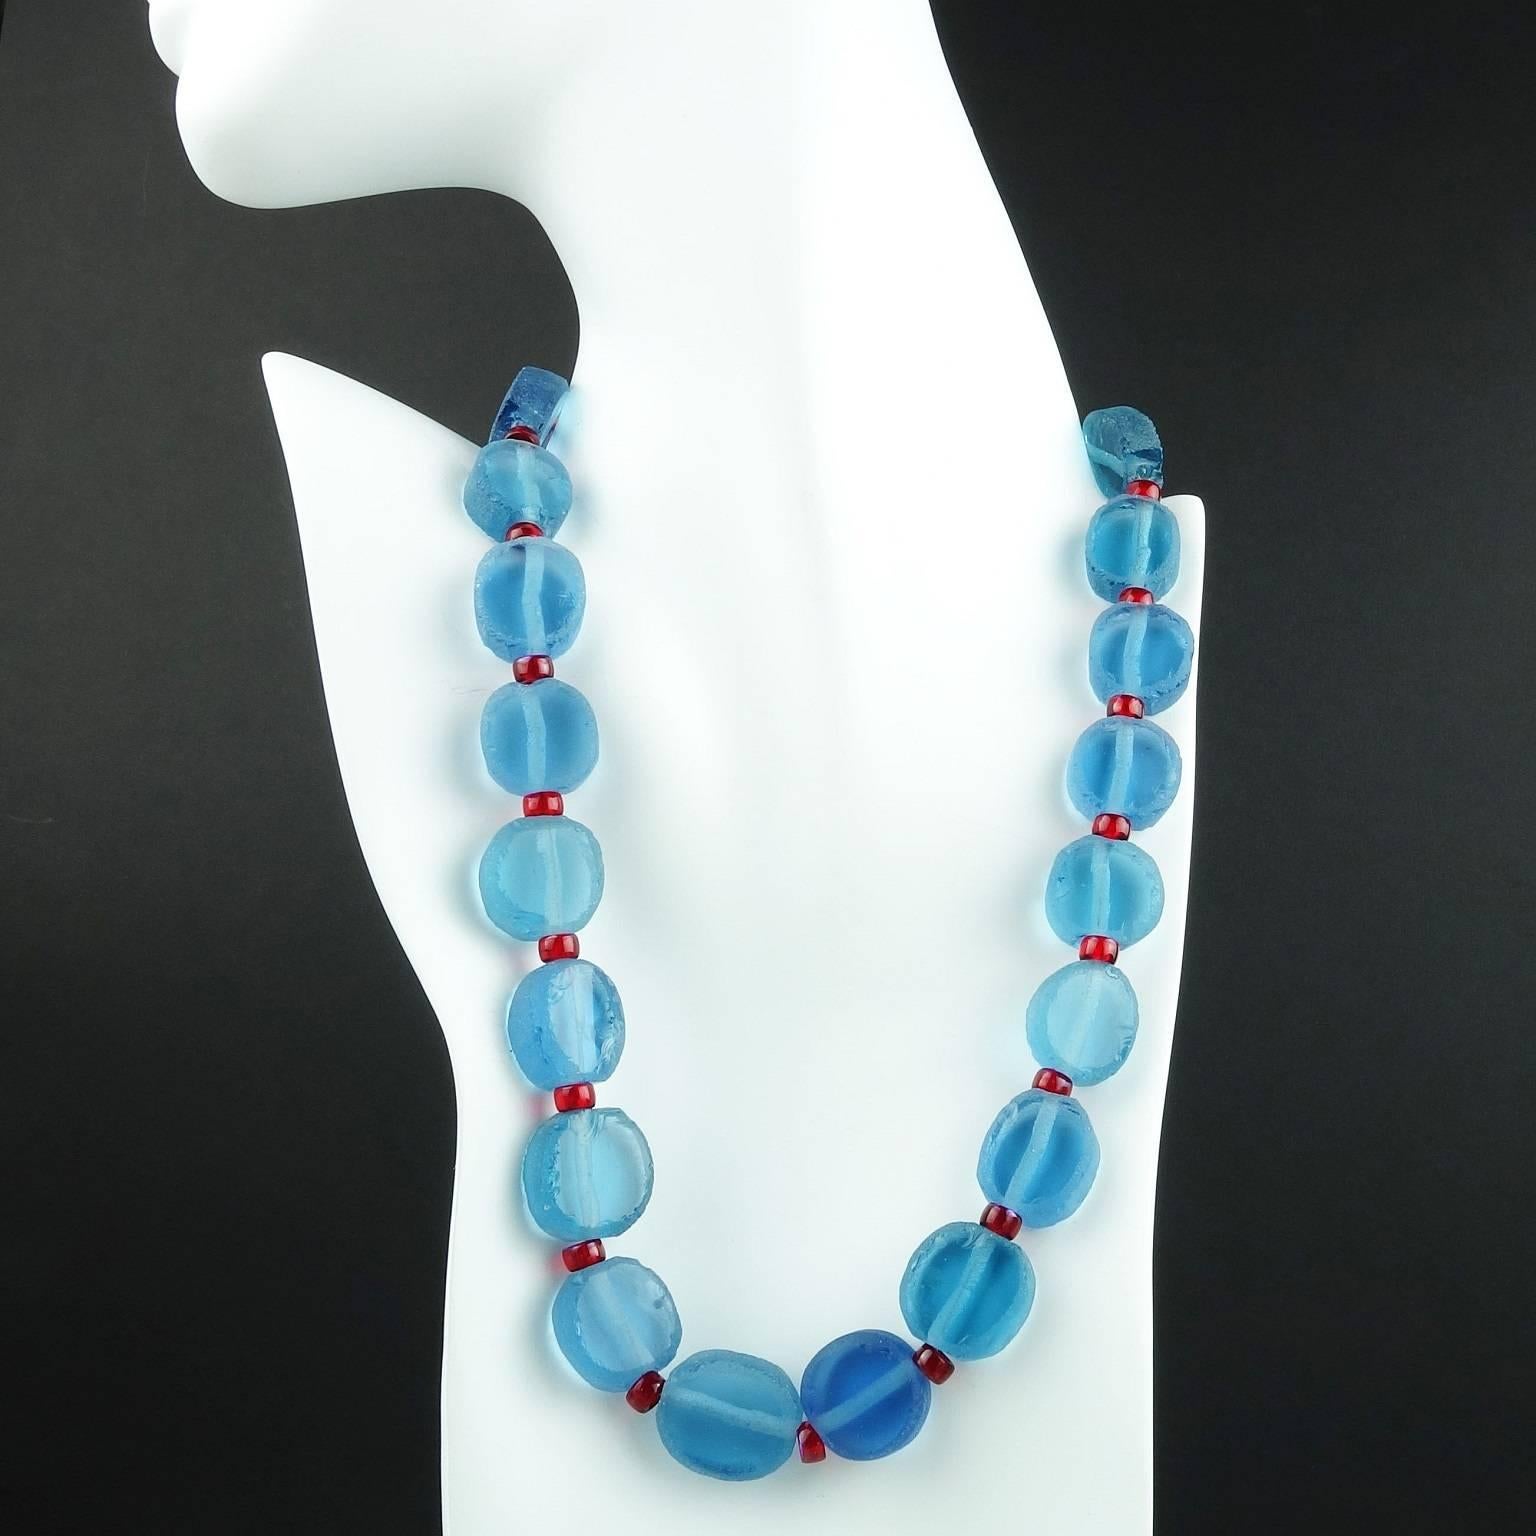 Bold necklace of polished discs of Bluish-Teal Sea Glass that are side drilled and accented with red crystals. Stunning contrast against white. Magnetic ball clasp slides sides apart.  More from this seller by putting gemjunky into 1stdibs search